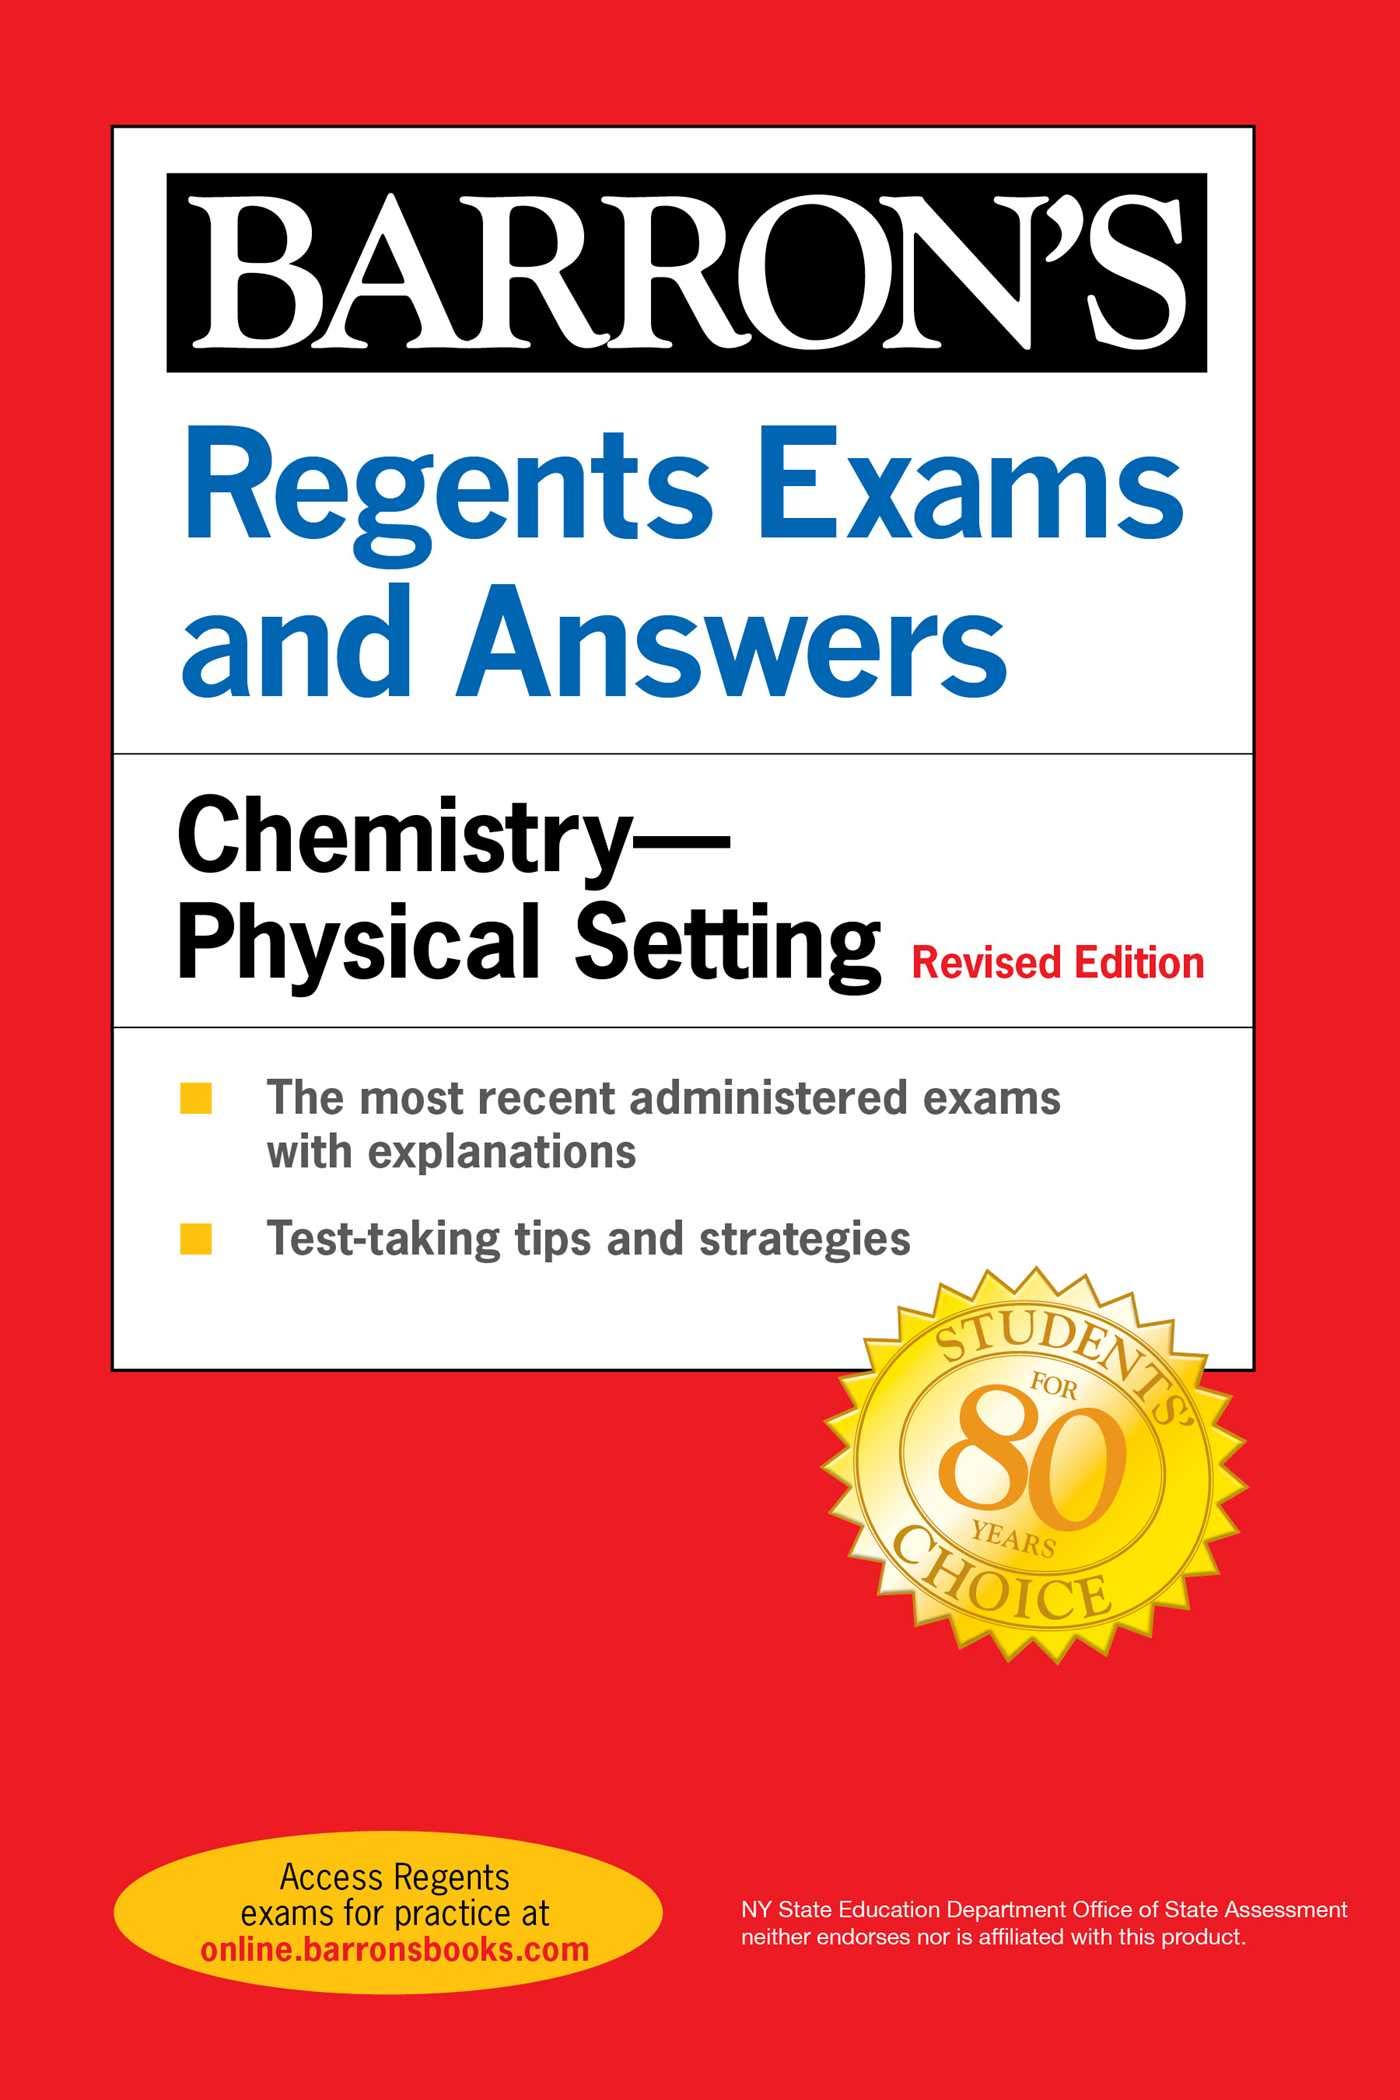 Regents Exams and Answers: Chemistry--Physical Setting Revised Edition (Barron's Regents NY)